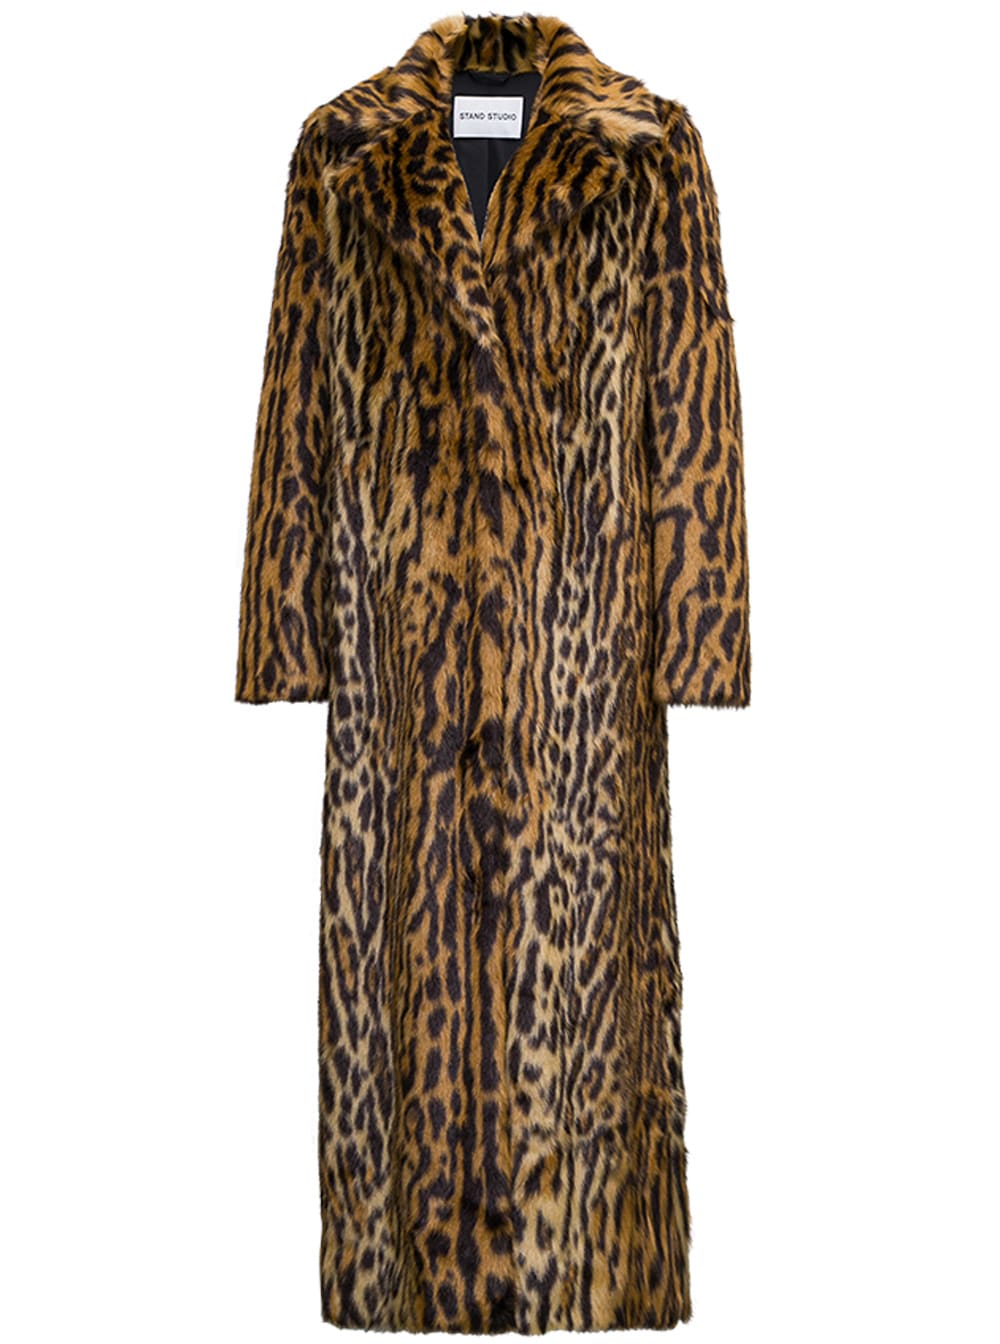 STAND STUDIO Kylie Long Coat With Animalier Print